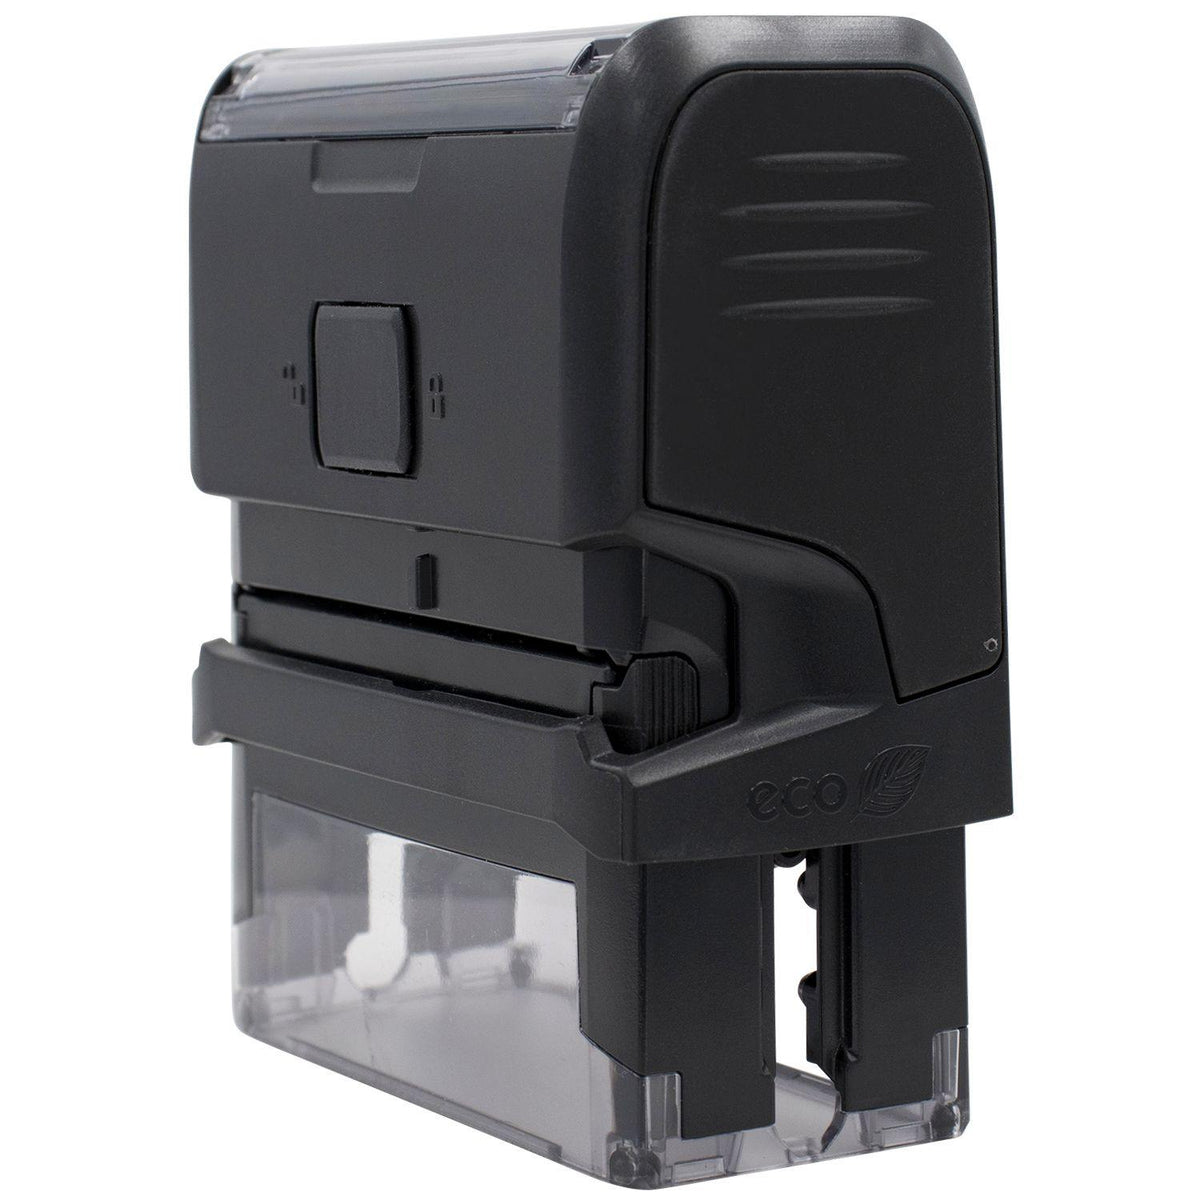 Large Self-Inking Optima Confidential Stamp - Engineer Seal Stamps - Brand_Trodat, Impression Size_Large, Stamp Type_Self-Inking Stamp, Type of Use_General, Type of Use_Office, Type of Use_Professional